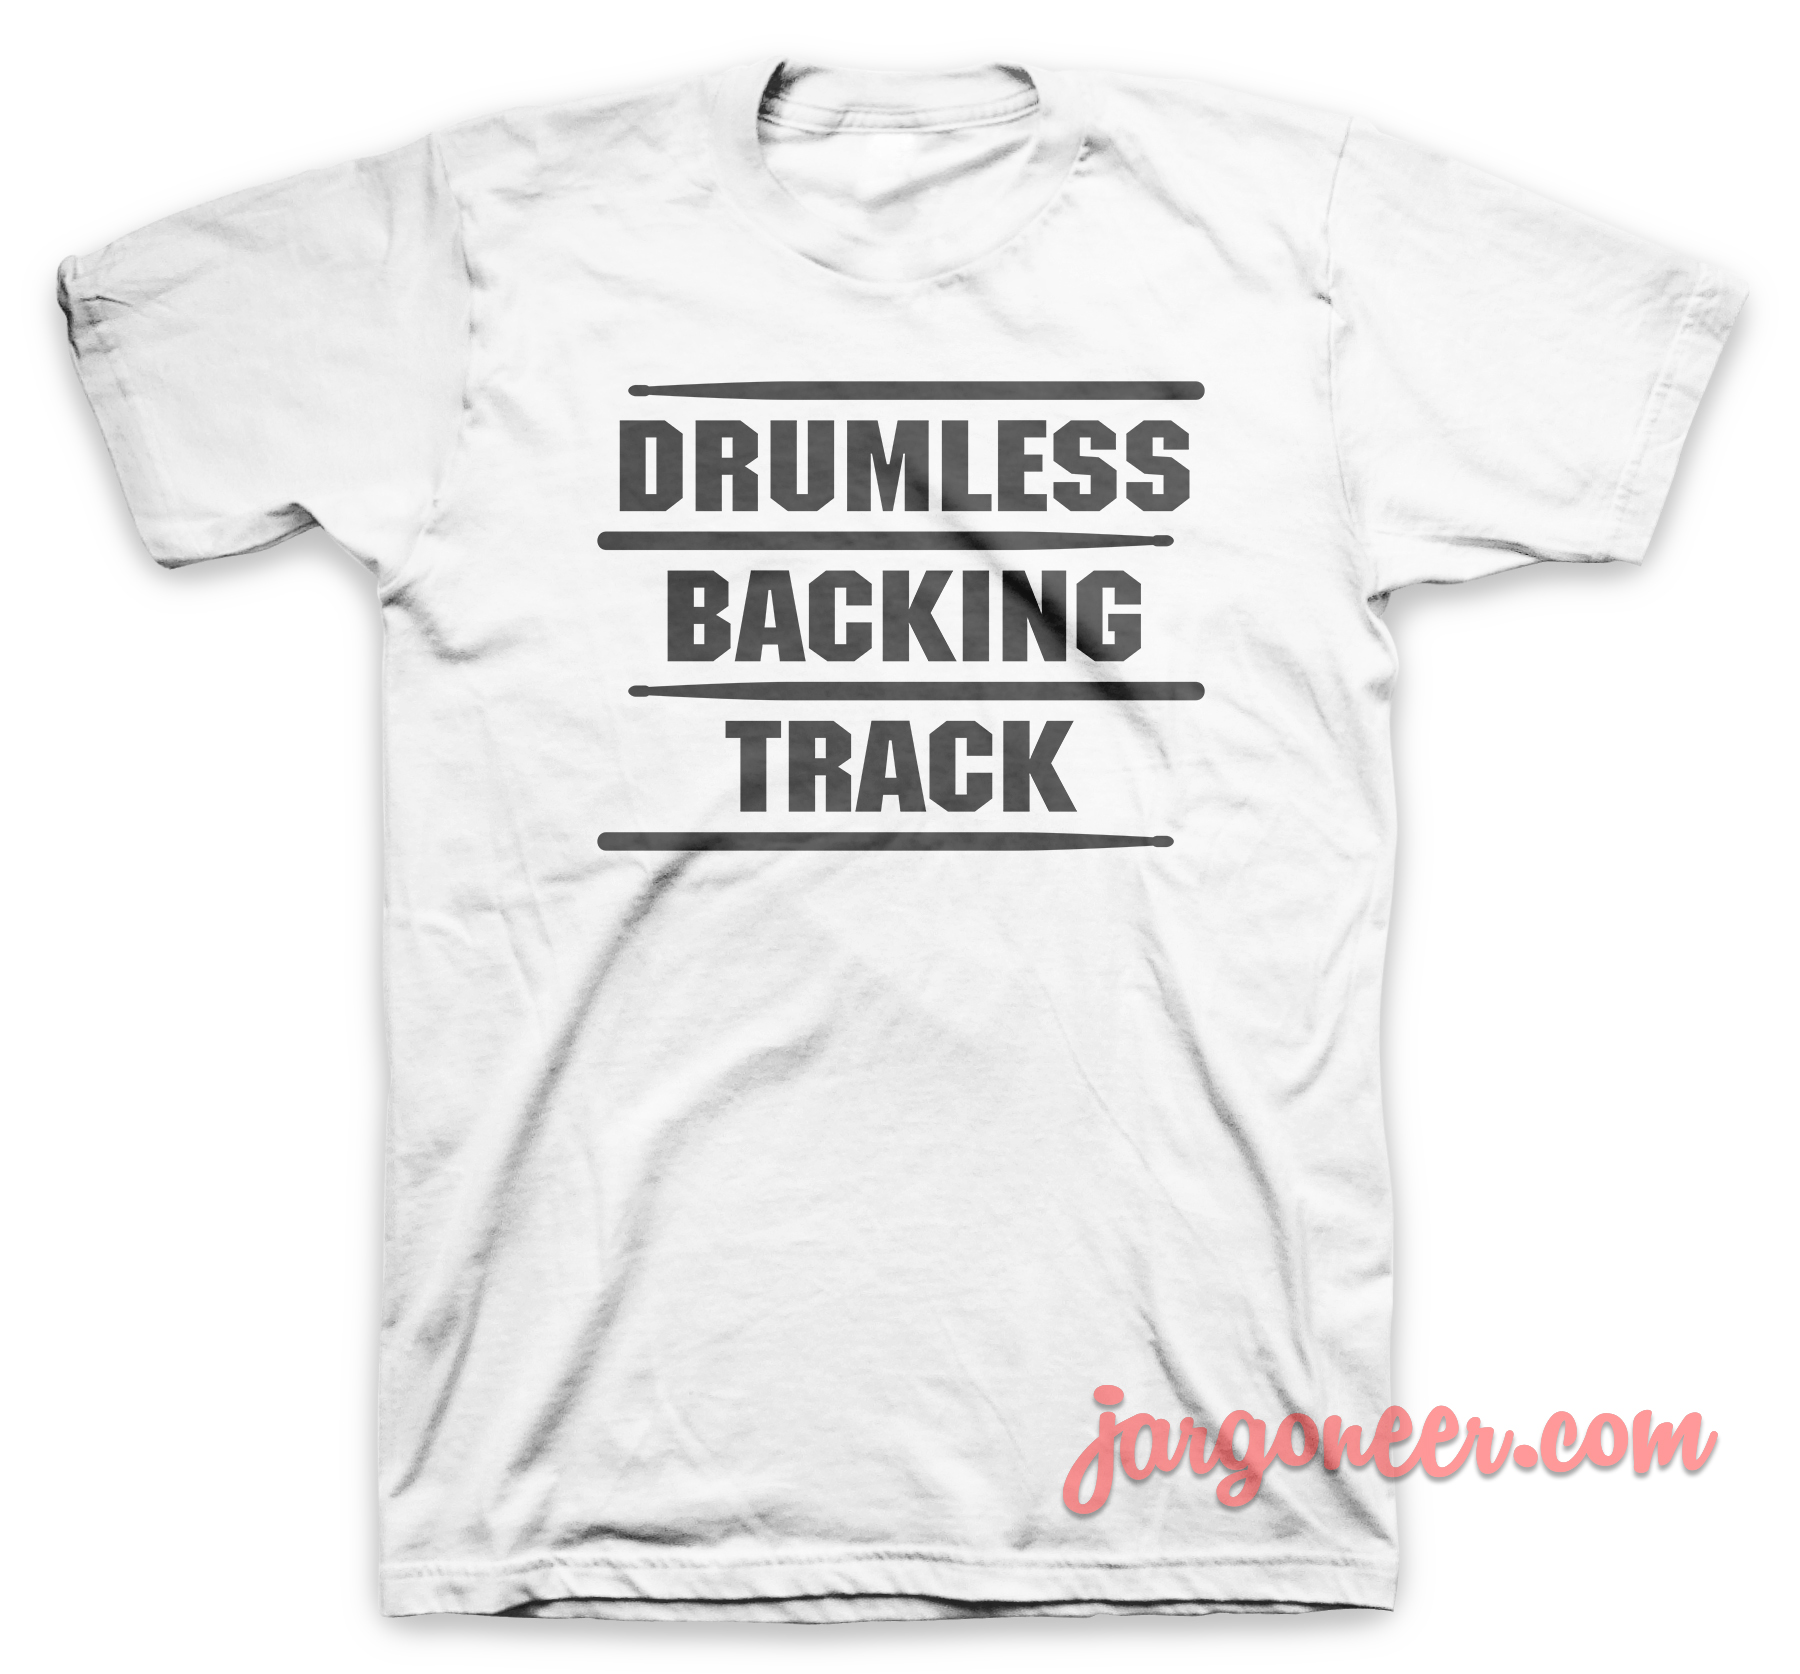 Drumless Backing Track White T Shirt - Shop Unique Graphic Cool Shirt Designs